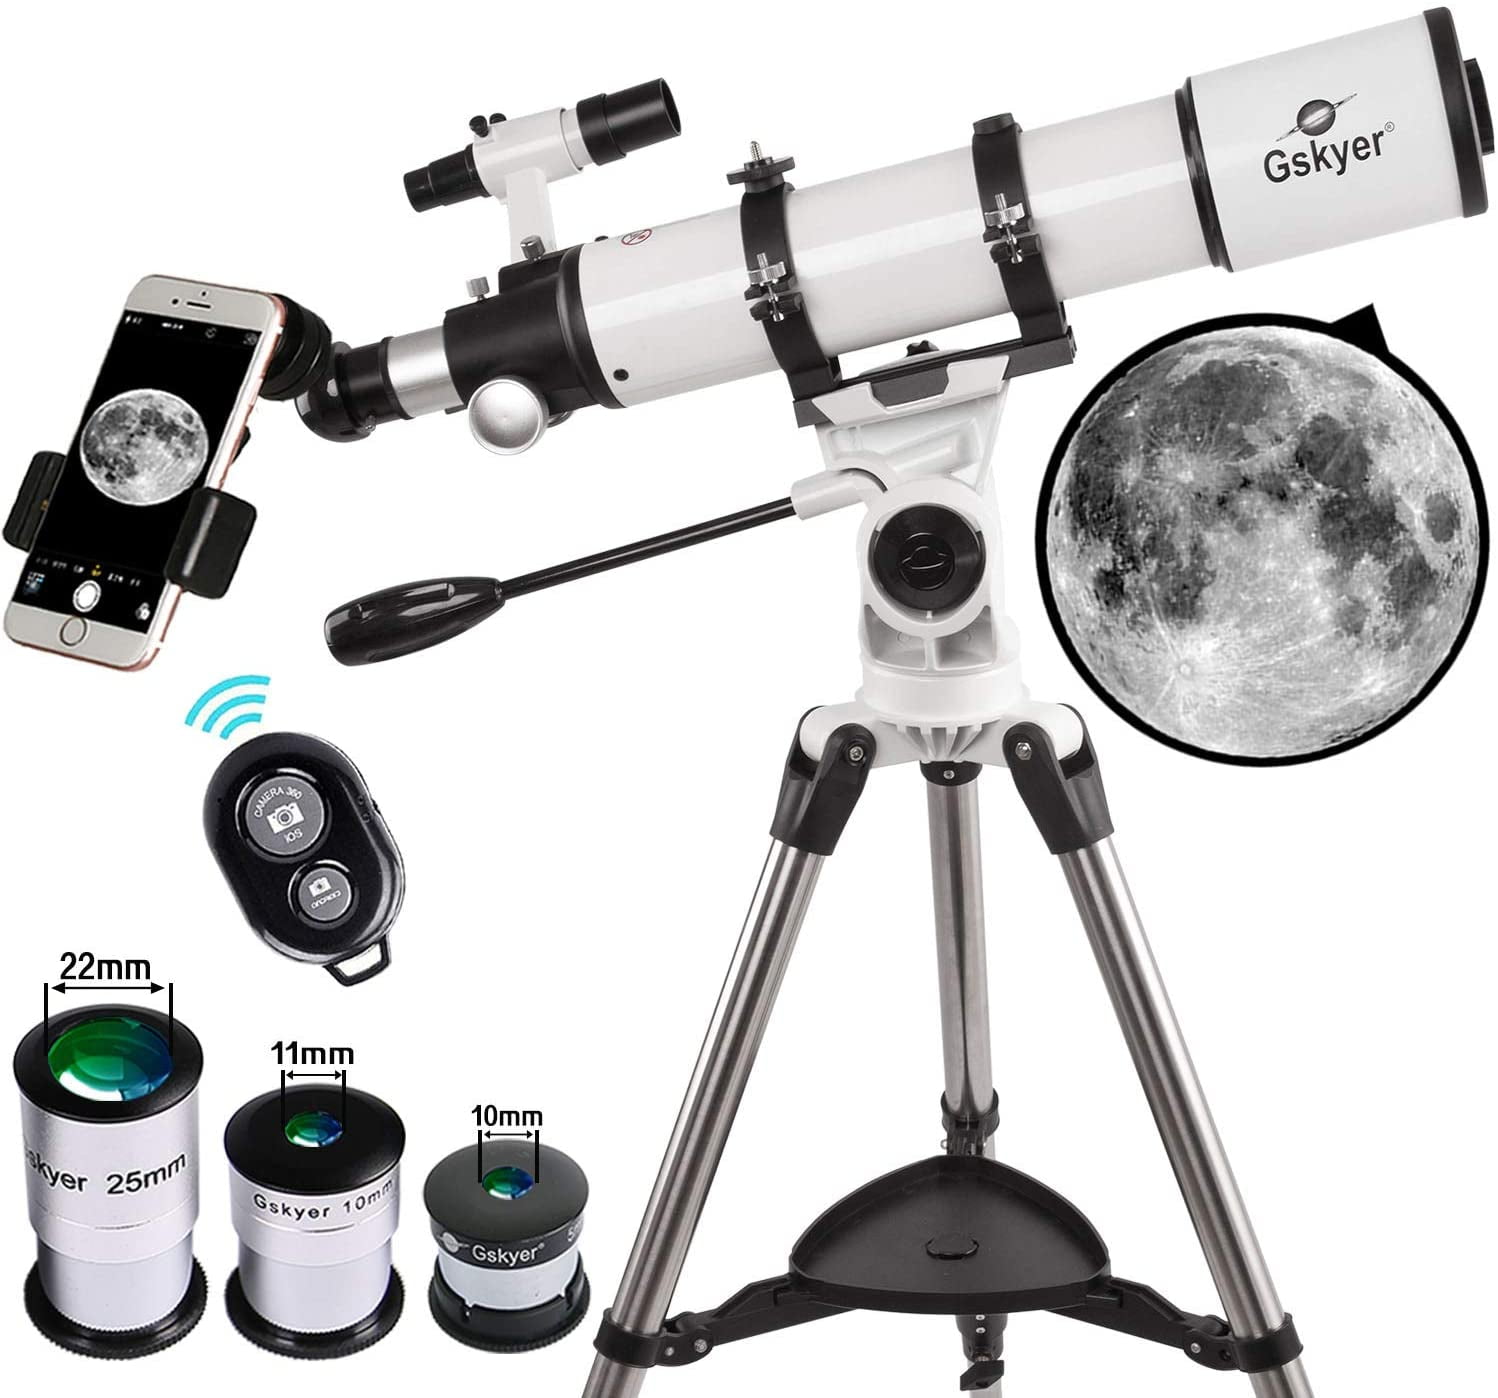 Watching the Moon Bird Watching Telescope 60mm Aperture Astronomy Telescope for Beginners Adults and Kids Refractor Telescope 700mm Focal Length Compact and Portable Viewing the Scenery